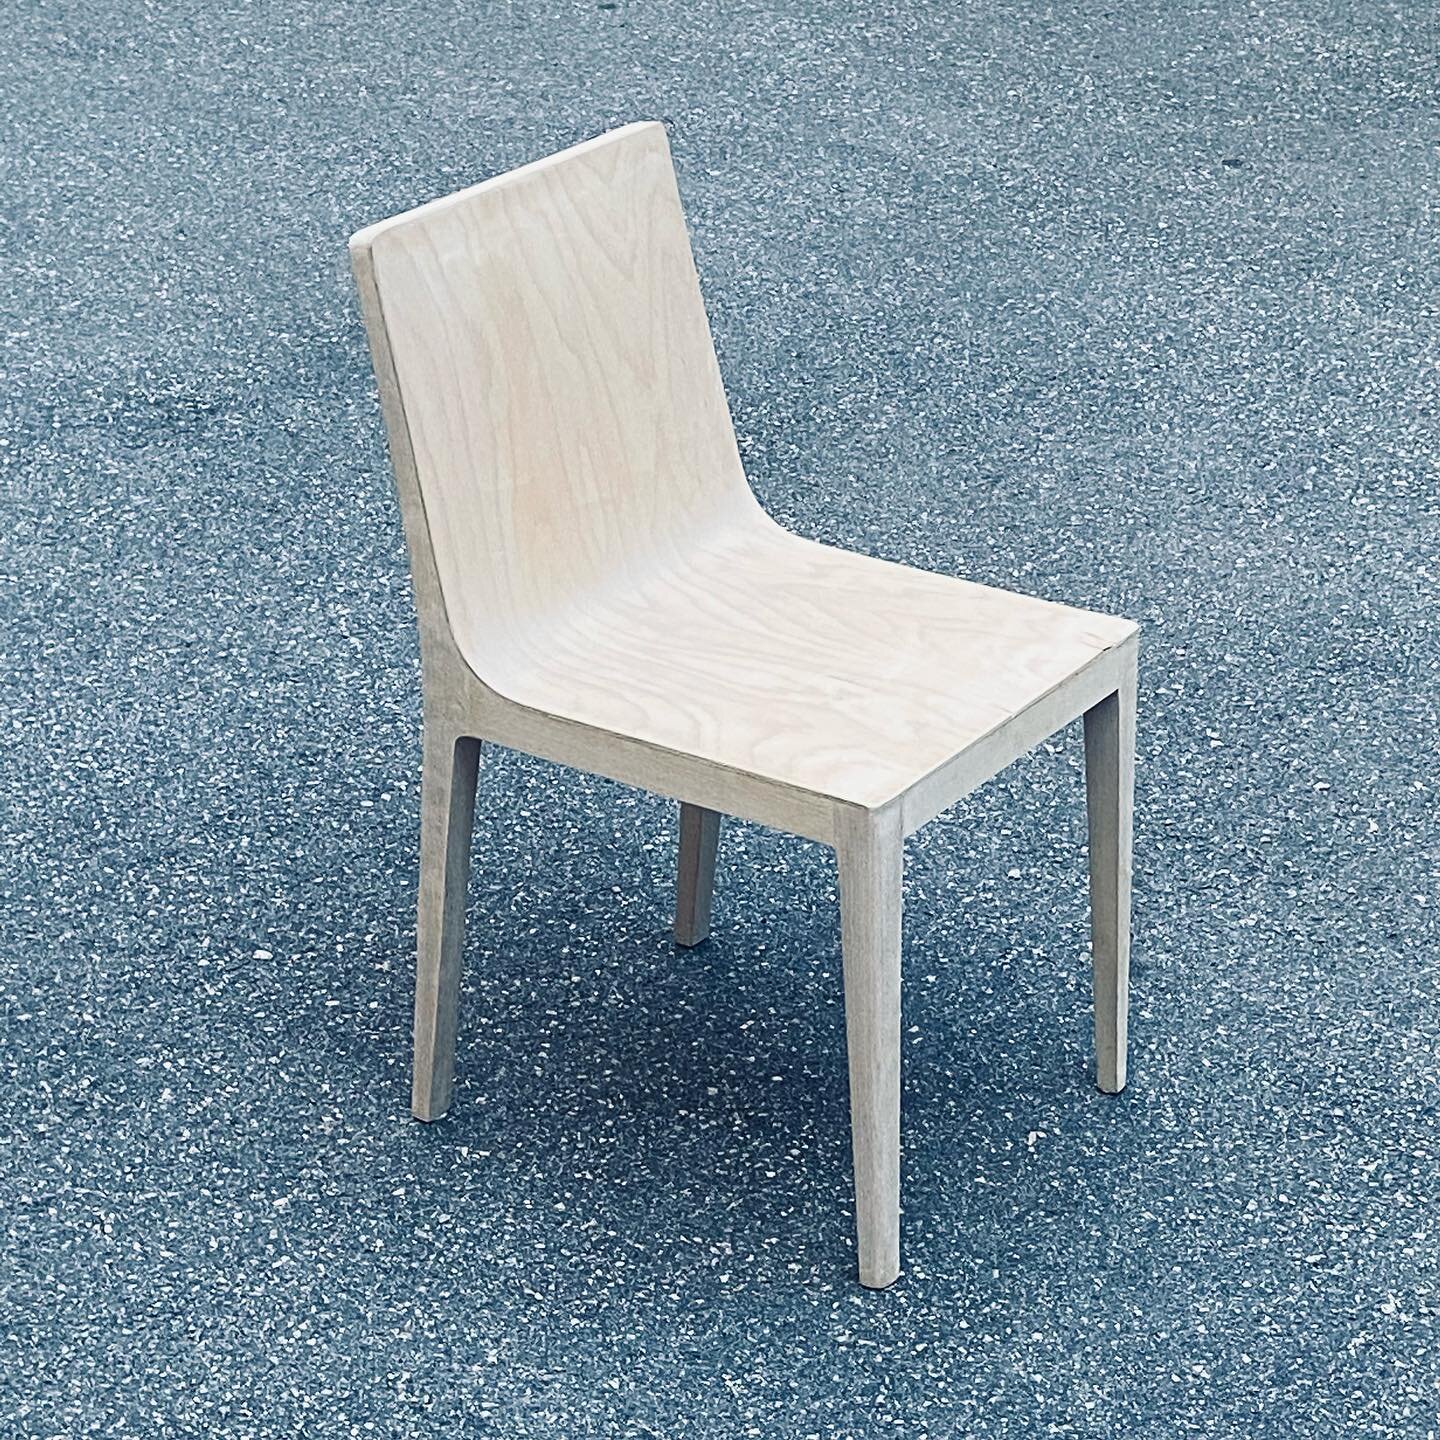 My first solid wood chair I crafted in 2016. It took part to a Ecodesign exhibition in Habitare fair in Helsinki. The chair is made of solid birch with 3D beech plies pressed into continuous seat-back shell.